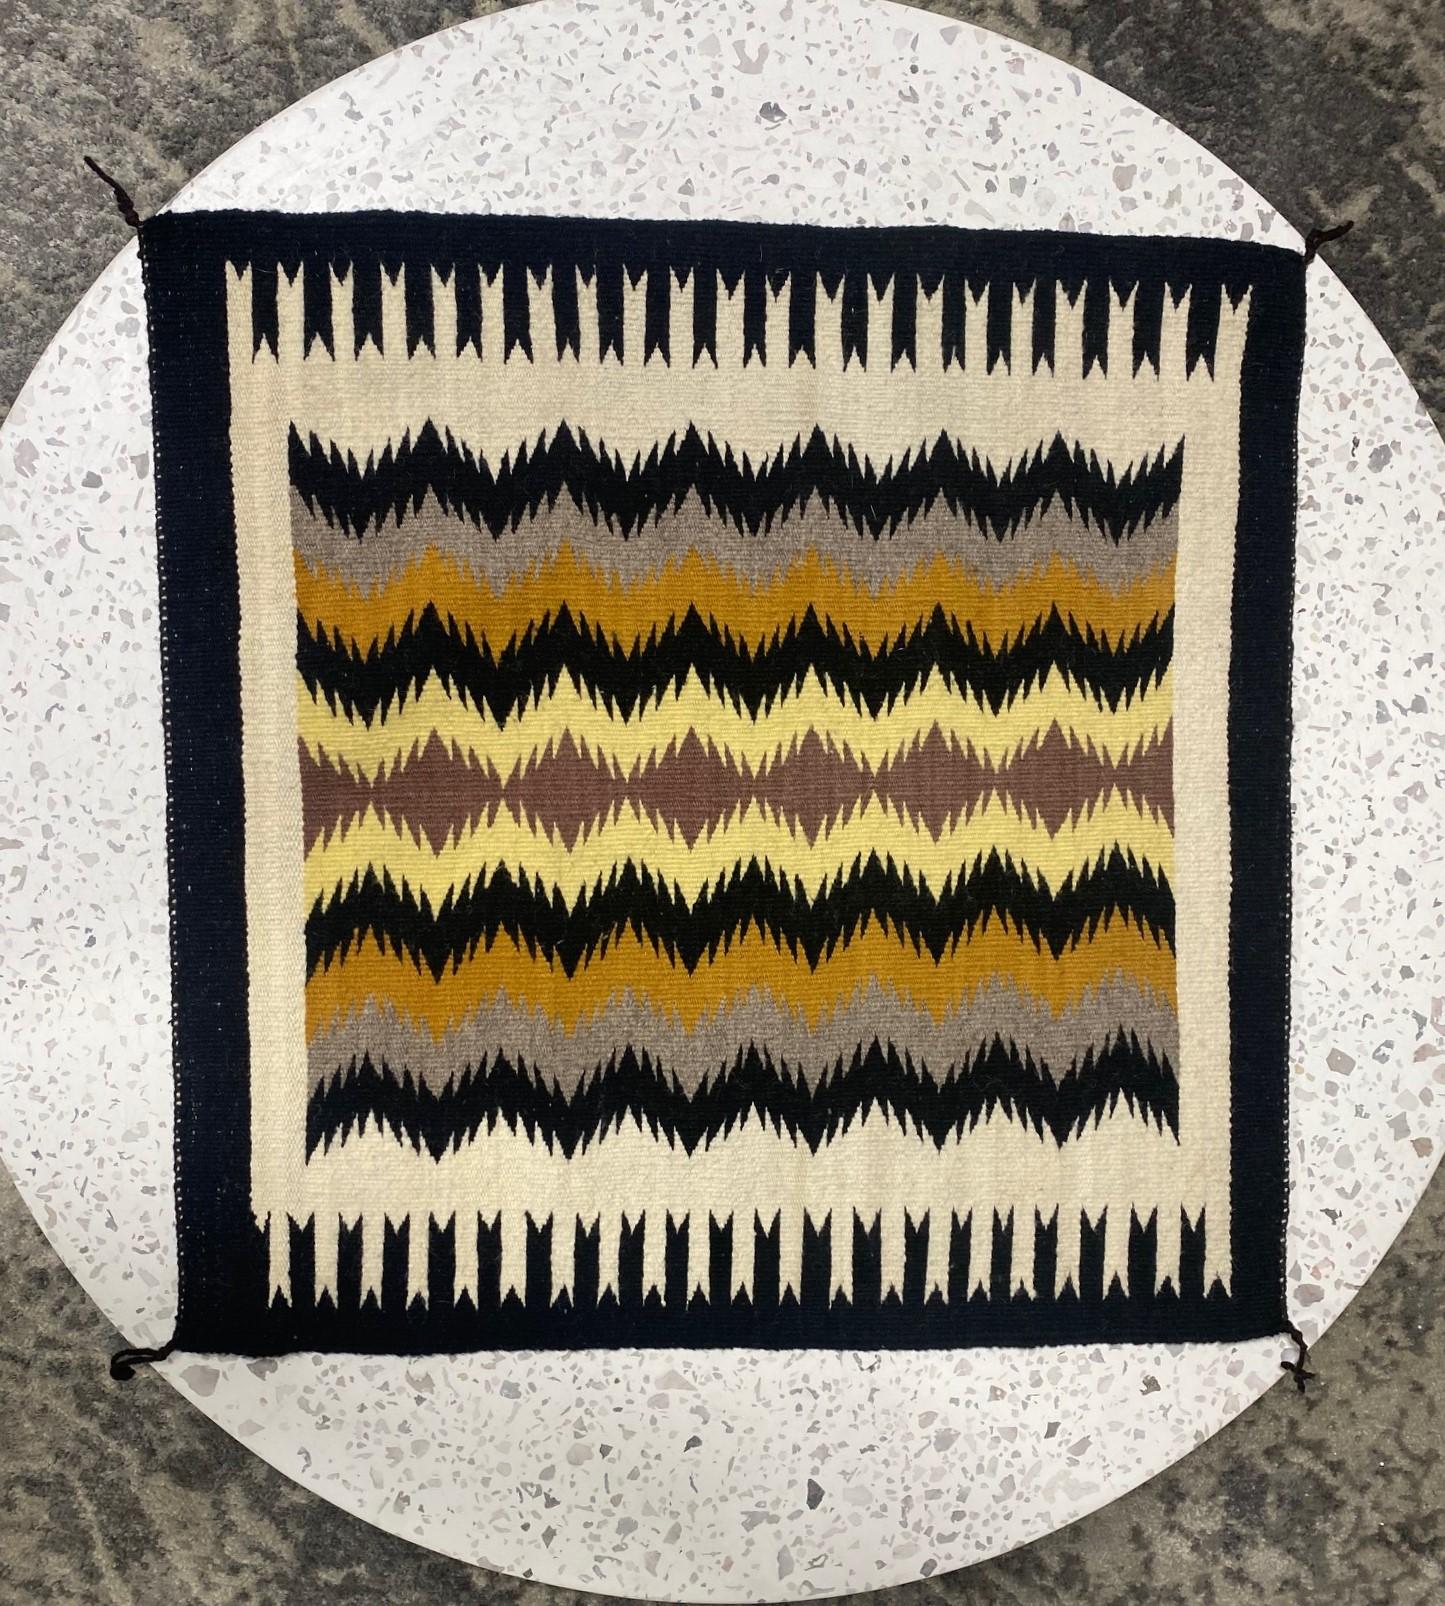 A nicely woven wool mat/rug in a geometric pattern which the Navajo tribe is famed for. In fantastic vintage condition. Originally acquired some years ago and placed in storage for good keeping. From a large collection of Native American artifacts